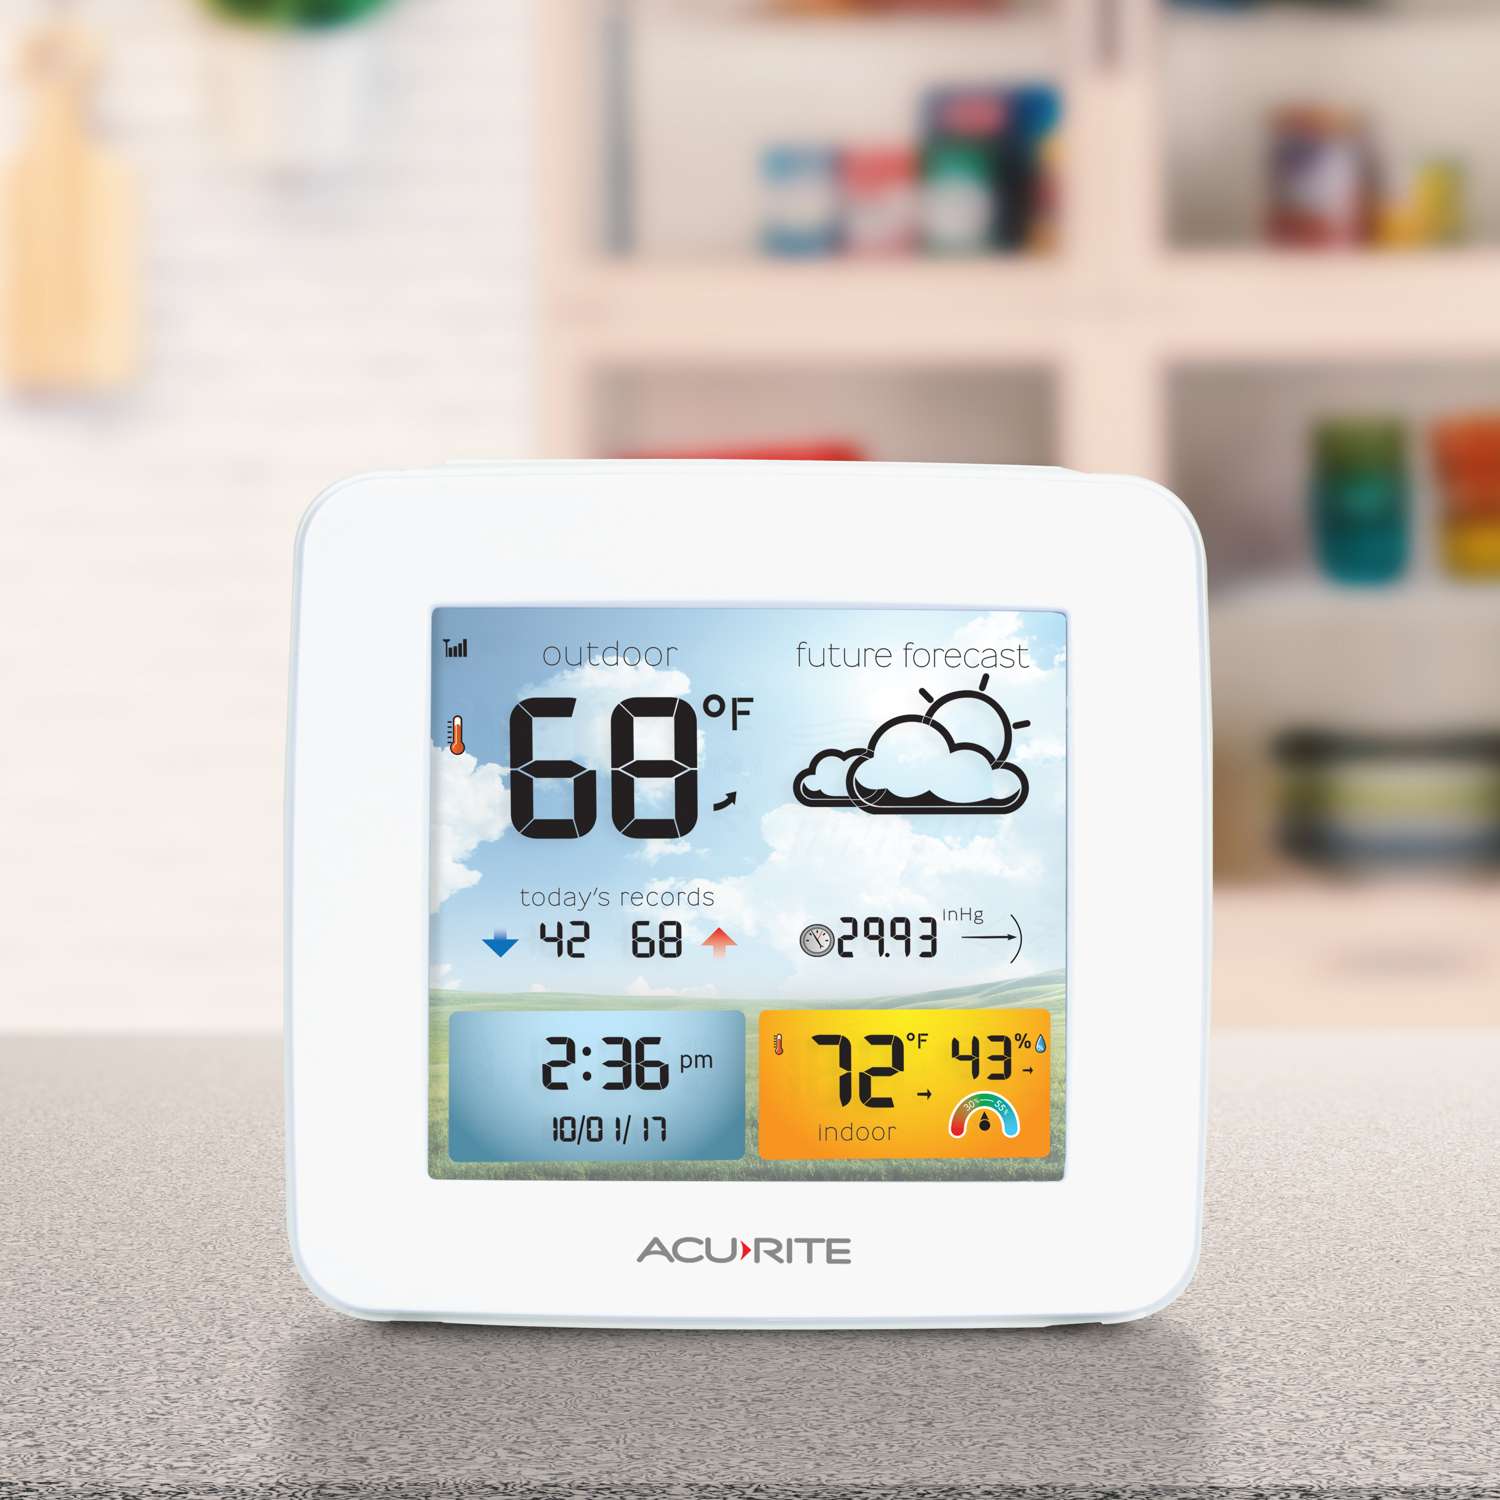 AcuRite Smart Thermostats